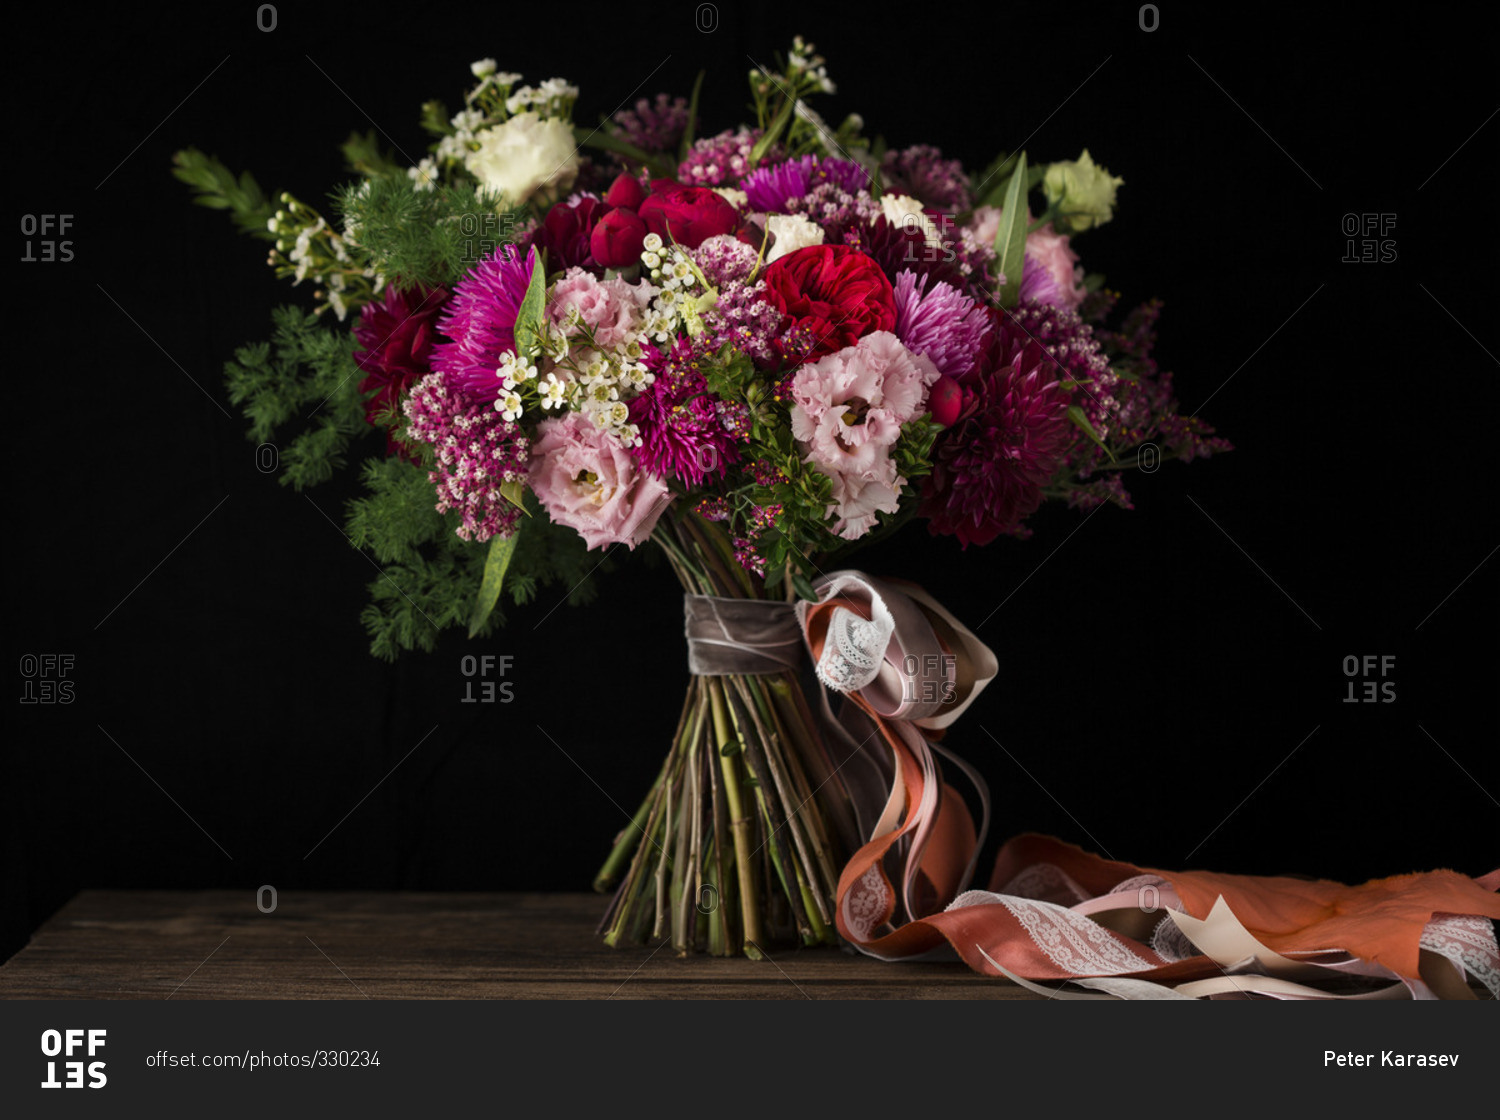 A bouquet of flowers on a table in front of a black background